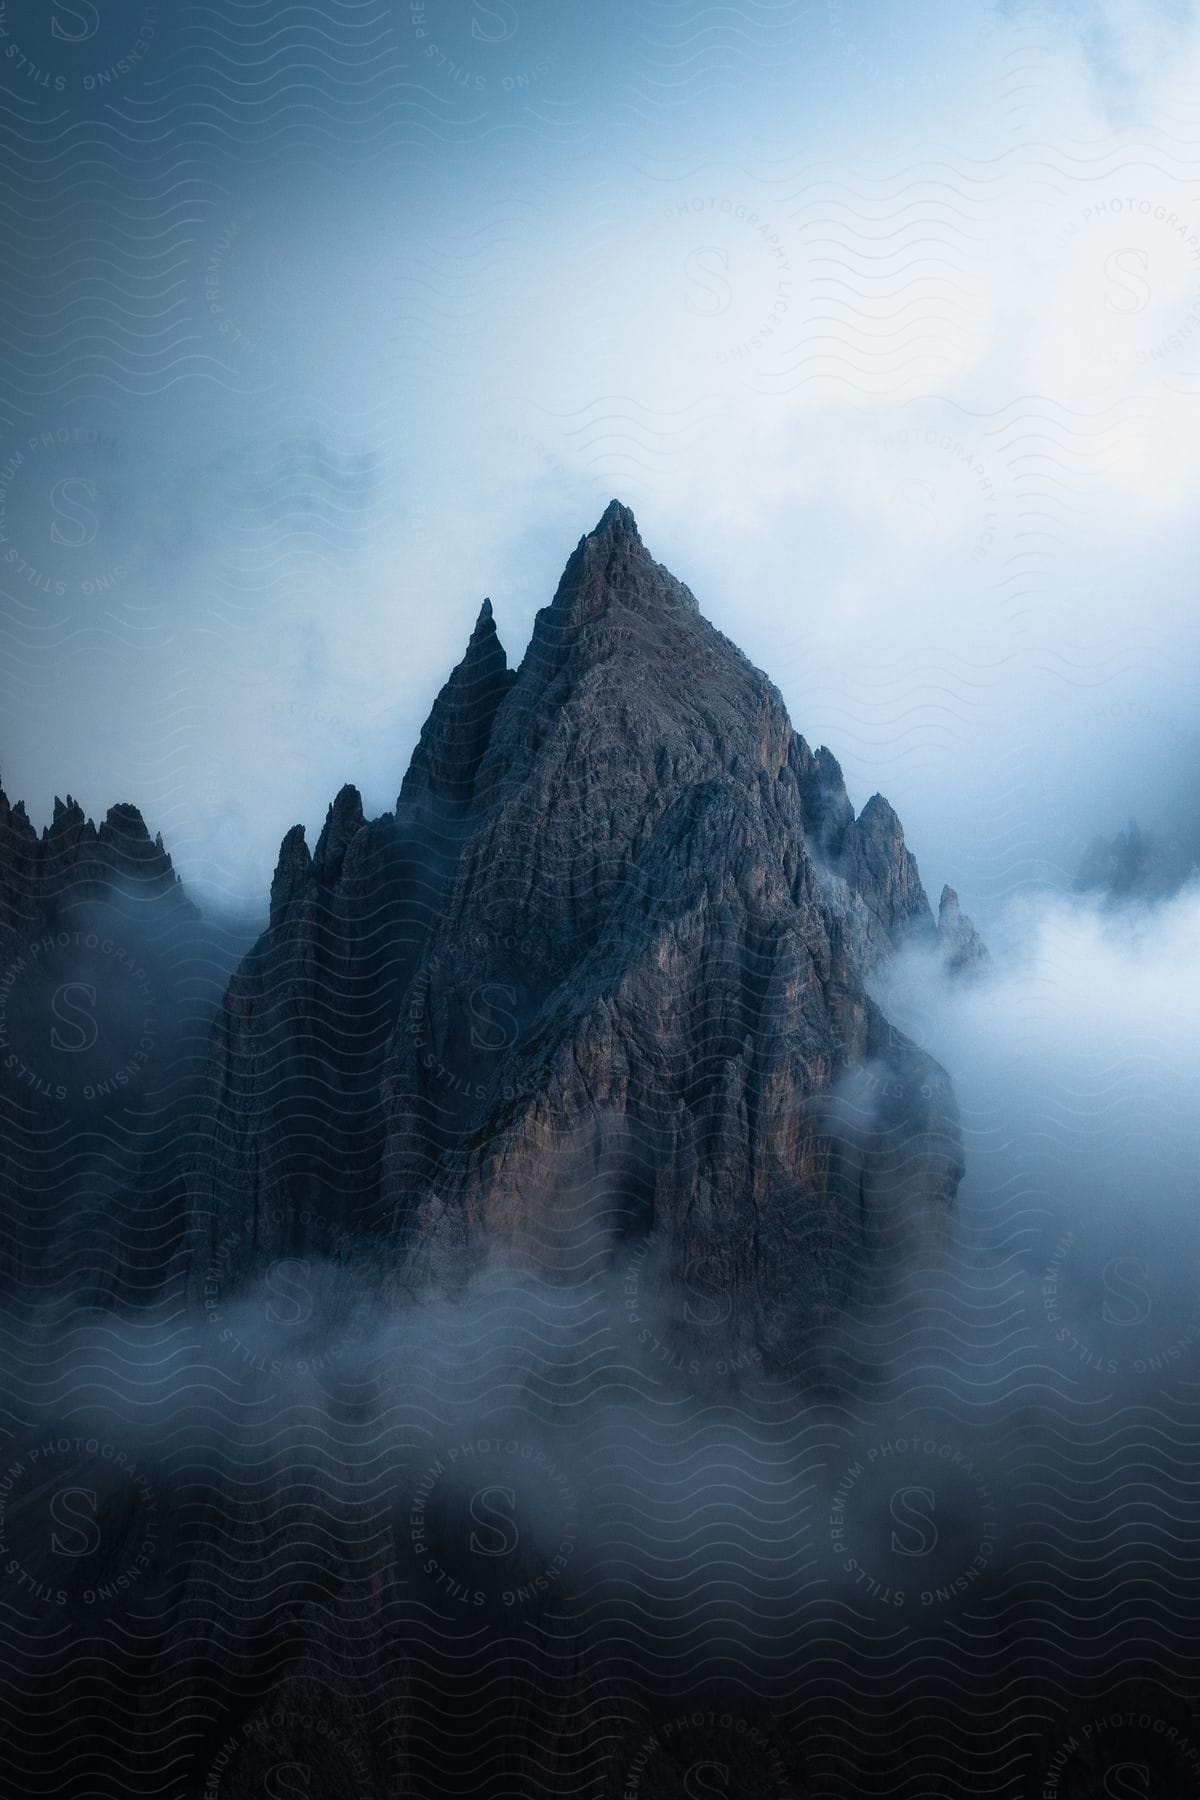 Peaks of craggy mountains show through low lying clouds.